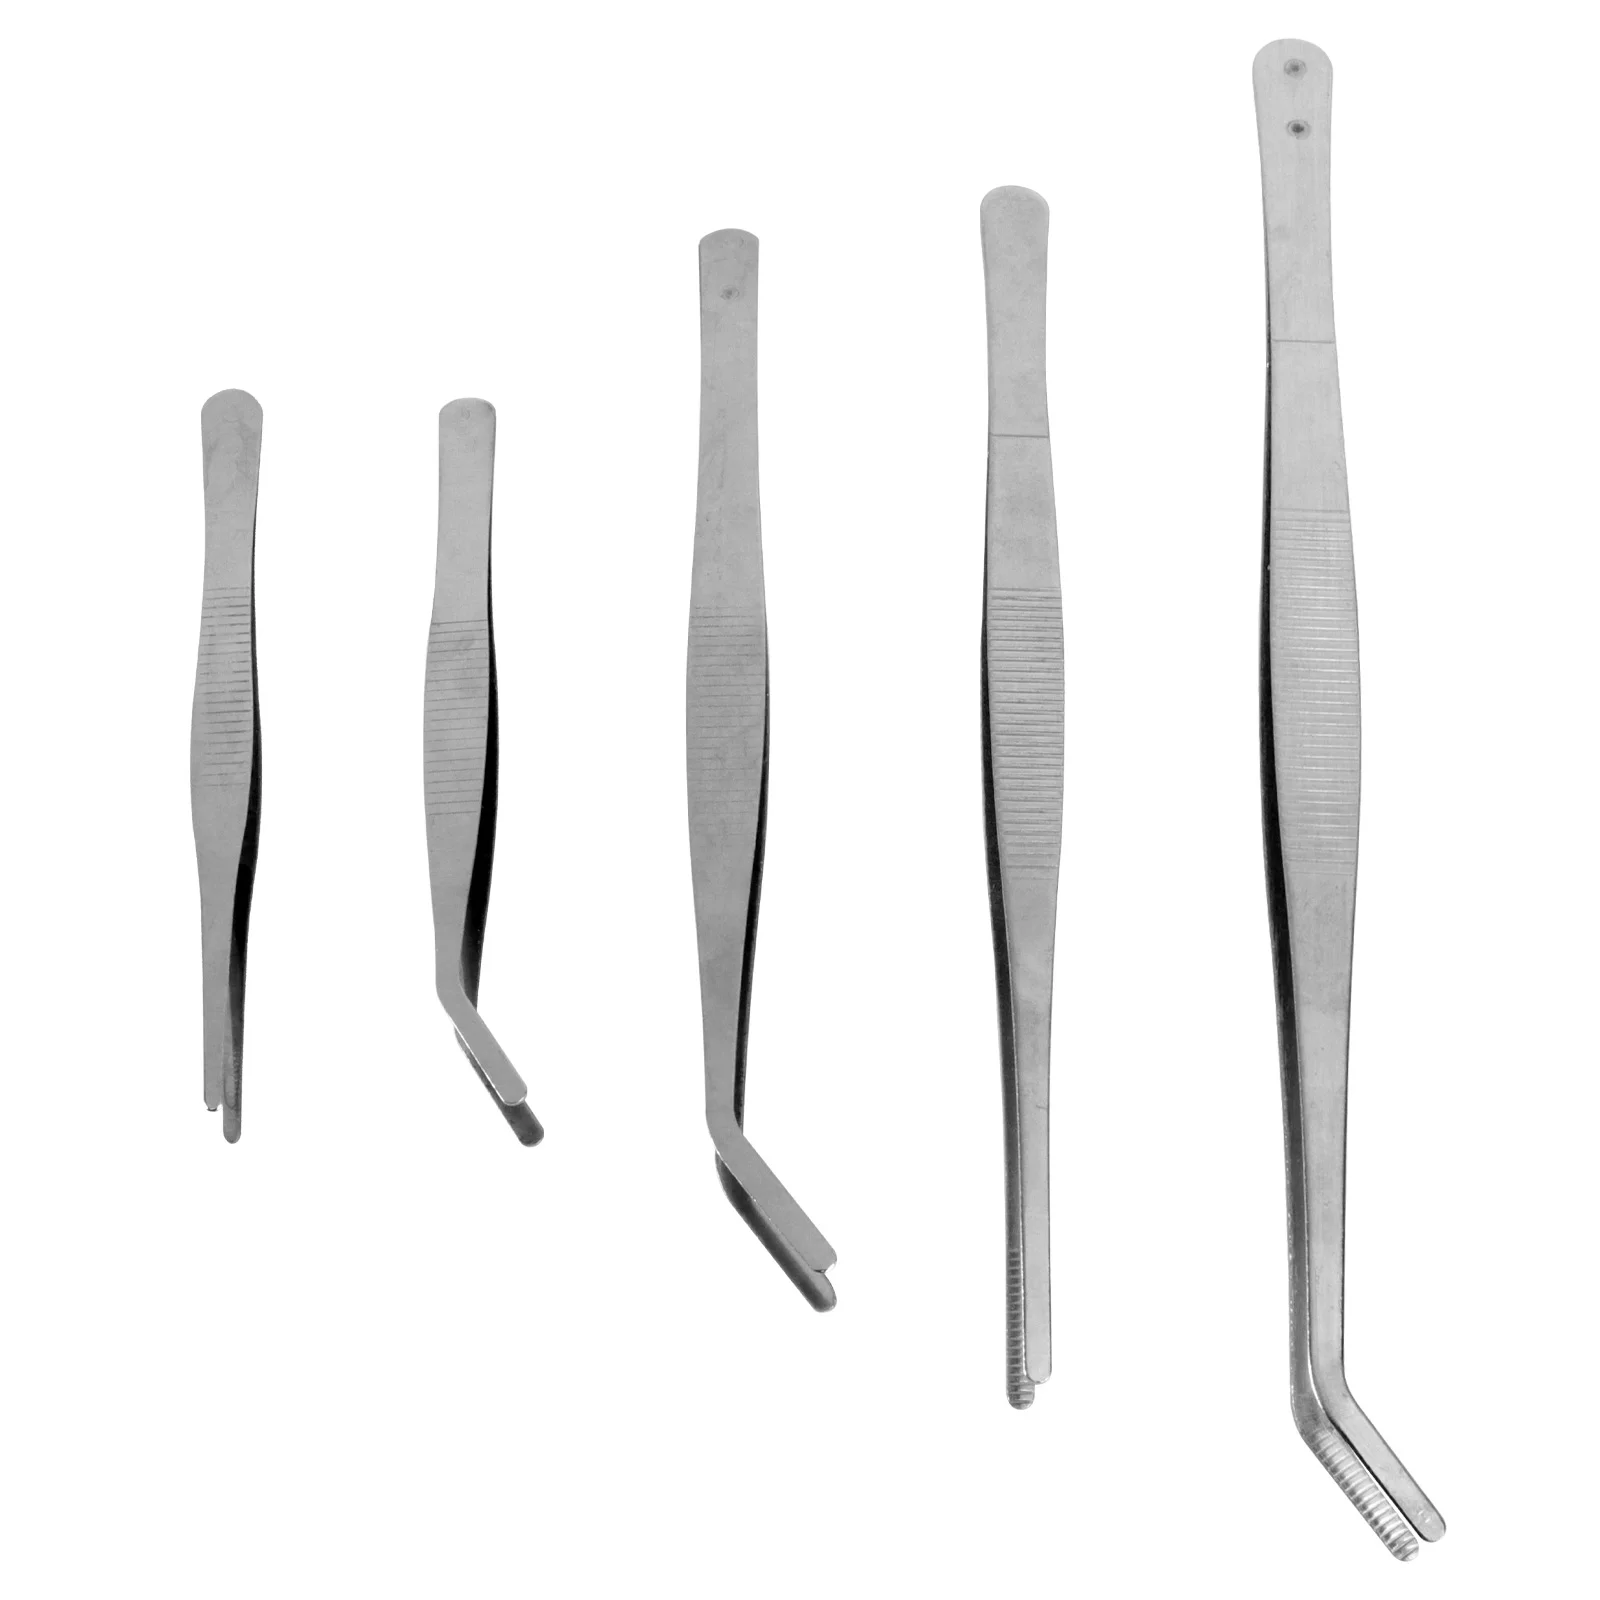 

5 Pcs Gardening Tweezers Beauty Kit Tool Accessory Miniature Hand Tools Stainless Steel Small Planting